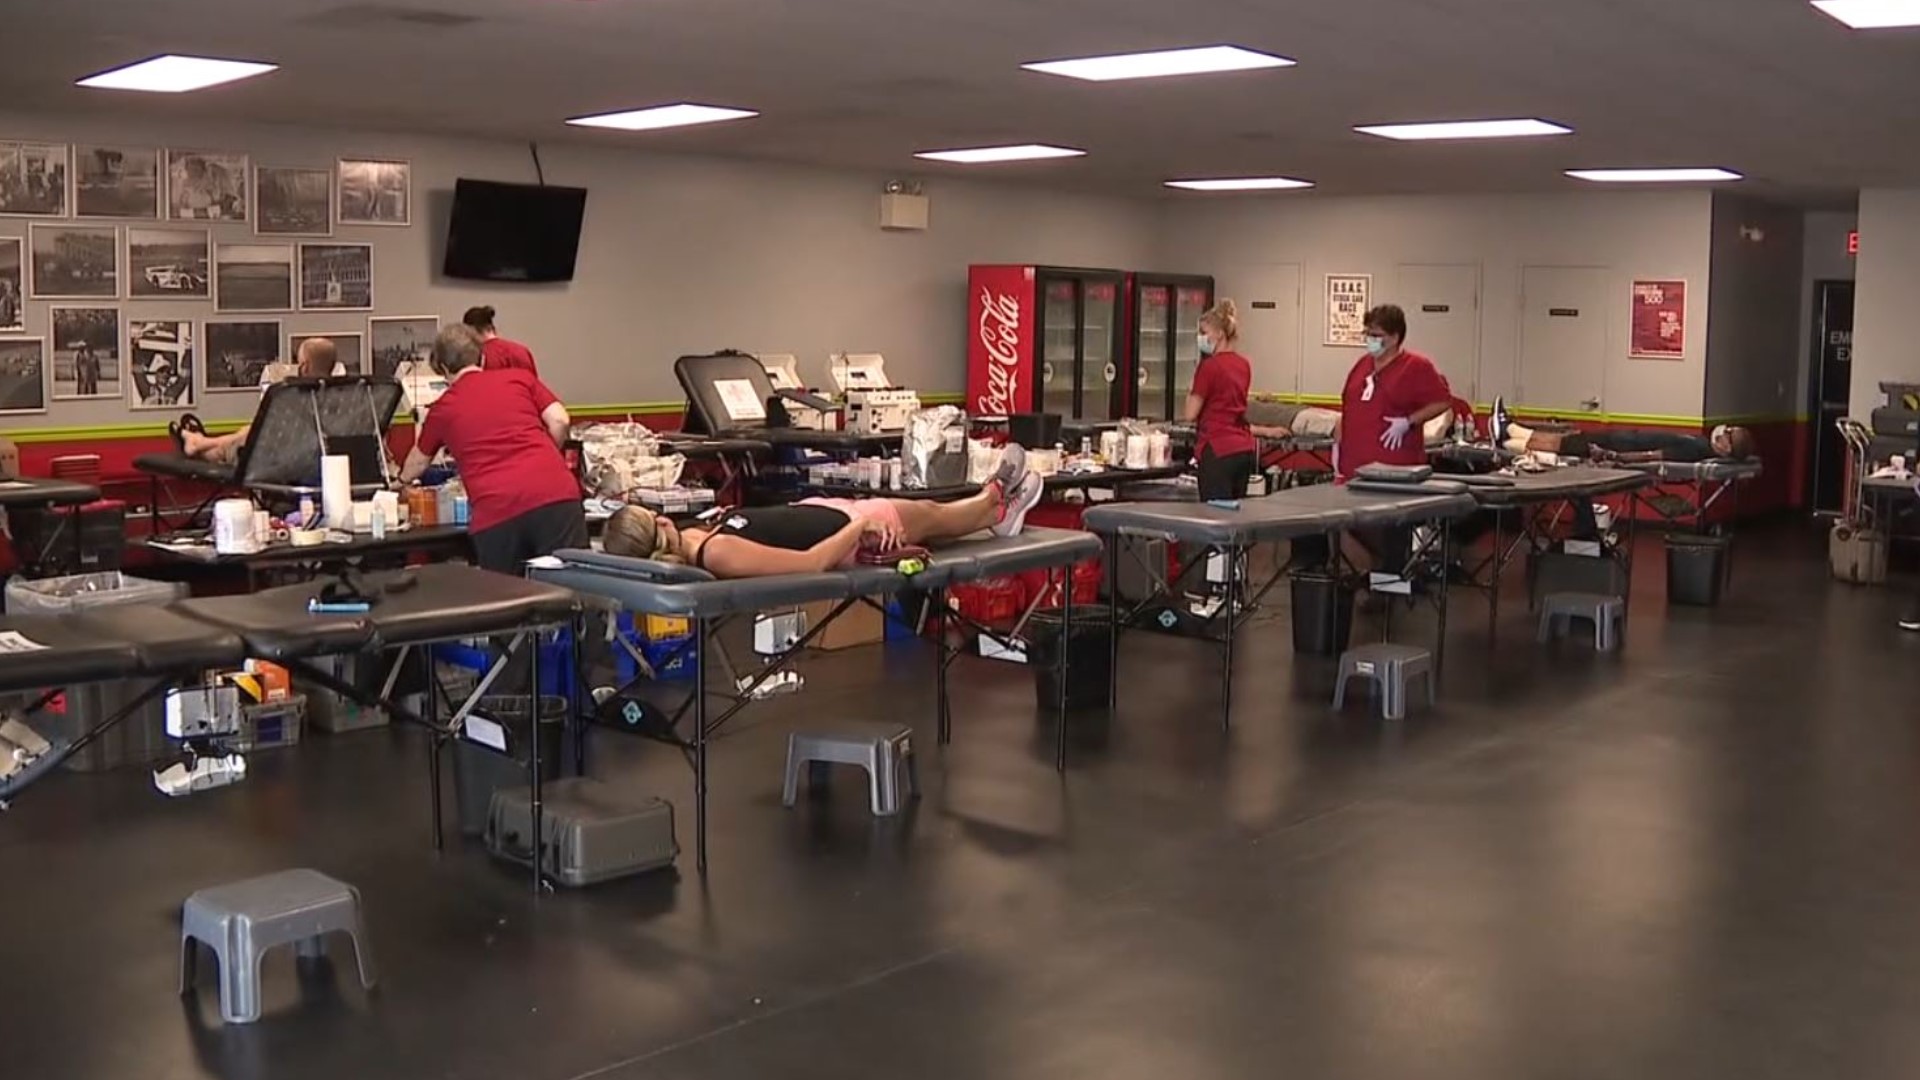 An organization that serves others is looking for some help itself. Newswatch 16's Sarah Buynovsky has more on the Red Cross's plea.